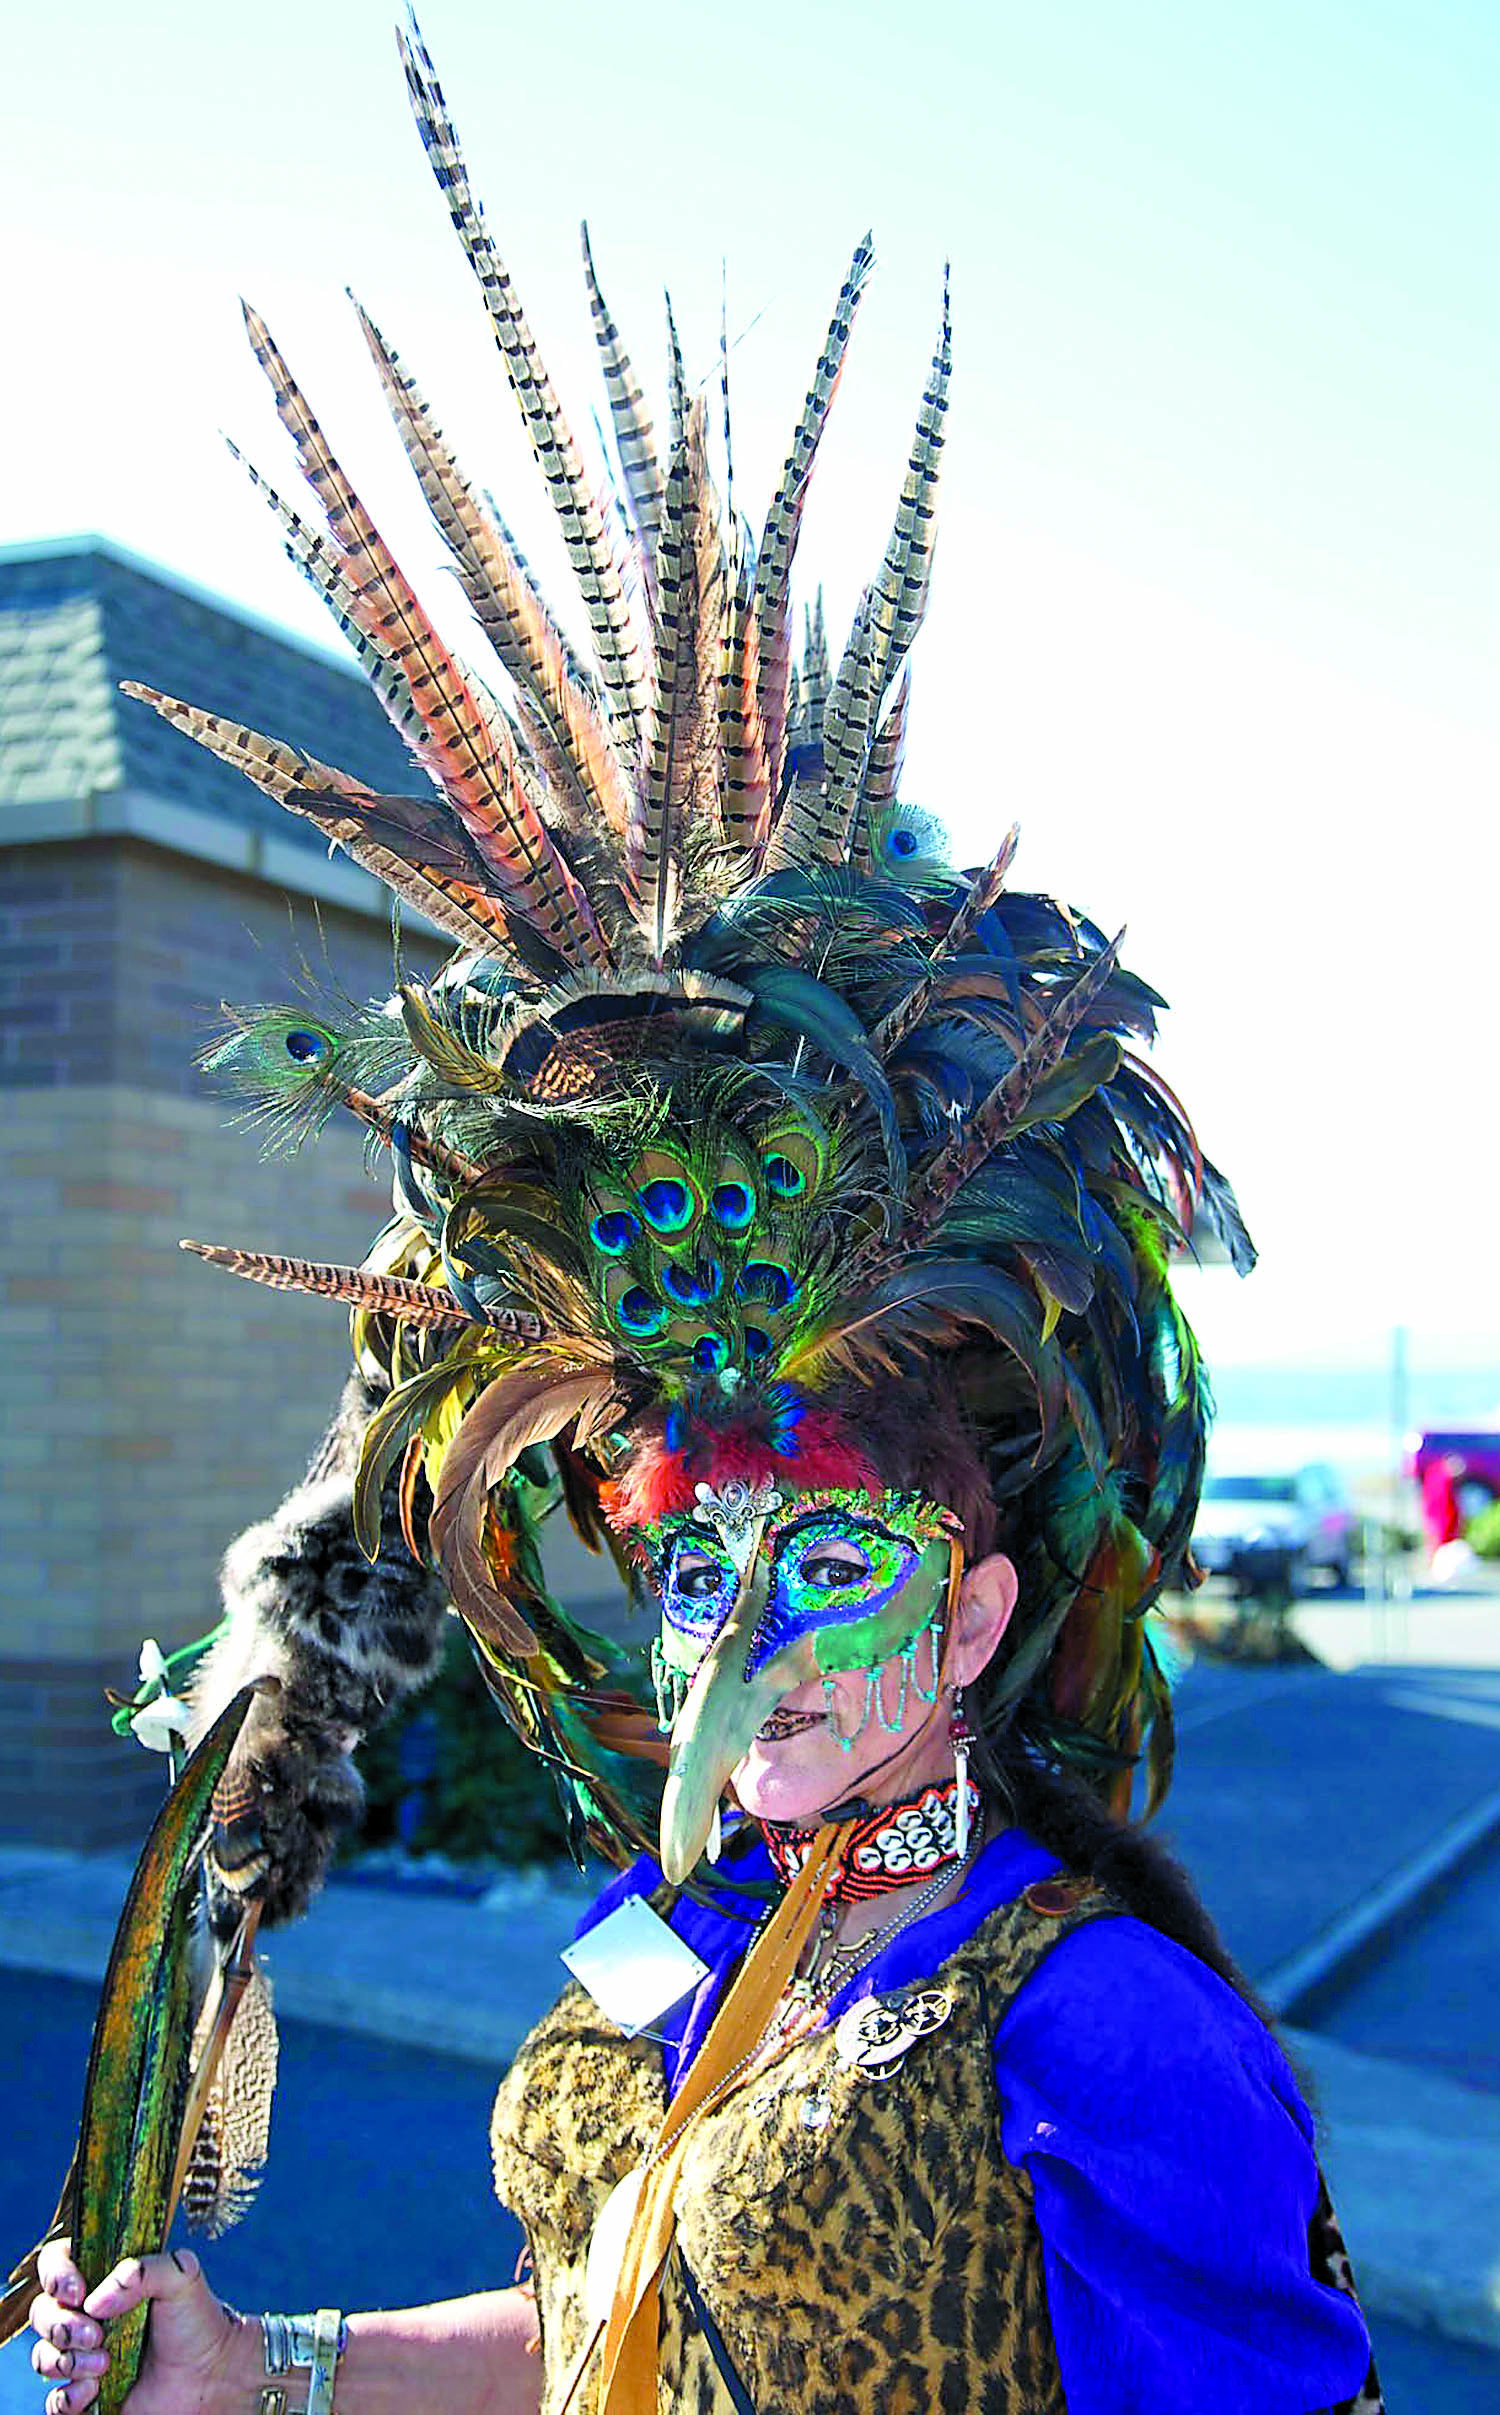 Dianna 'Tupa” Denny of Port Townsend shows off her regalia depicting a Mayan shaman for the 30th Kinetic Skulpture Parade in Port Townsend on Saturday. Steve Mullensky/for Peninsula Daily News